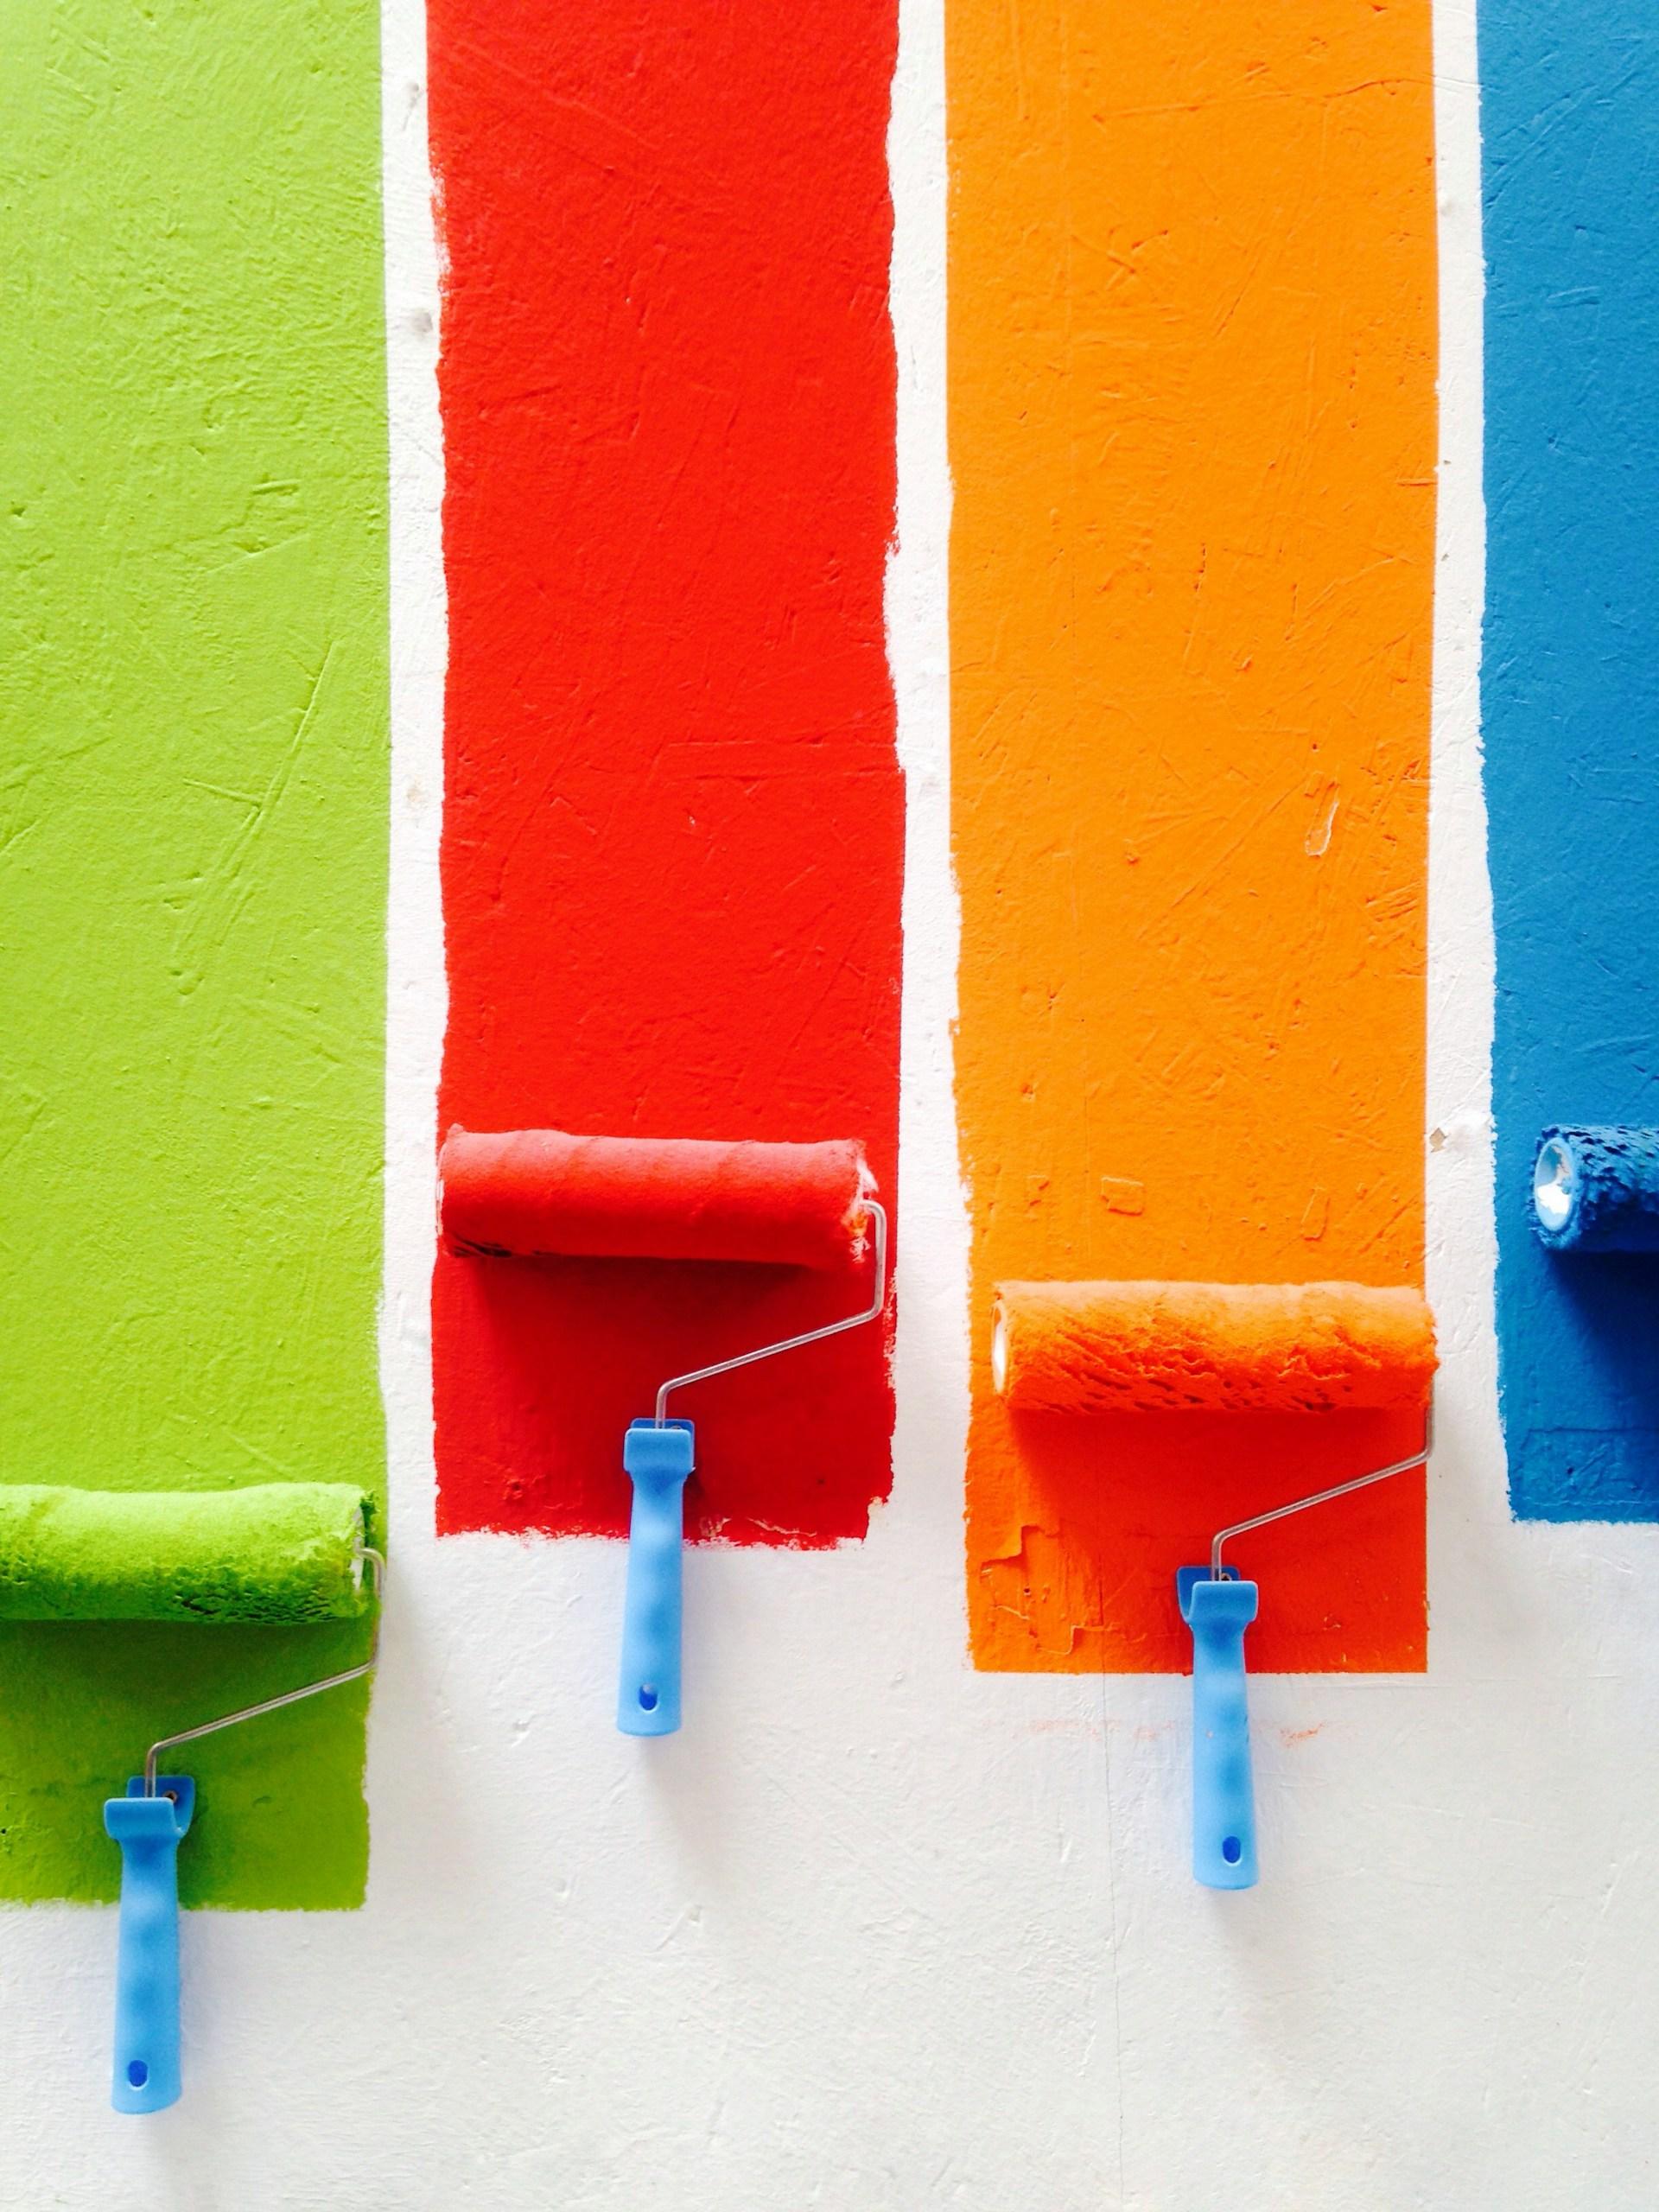 HOW HOUSE PAINTING AFFECTS YOUR MOODS